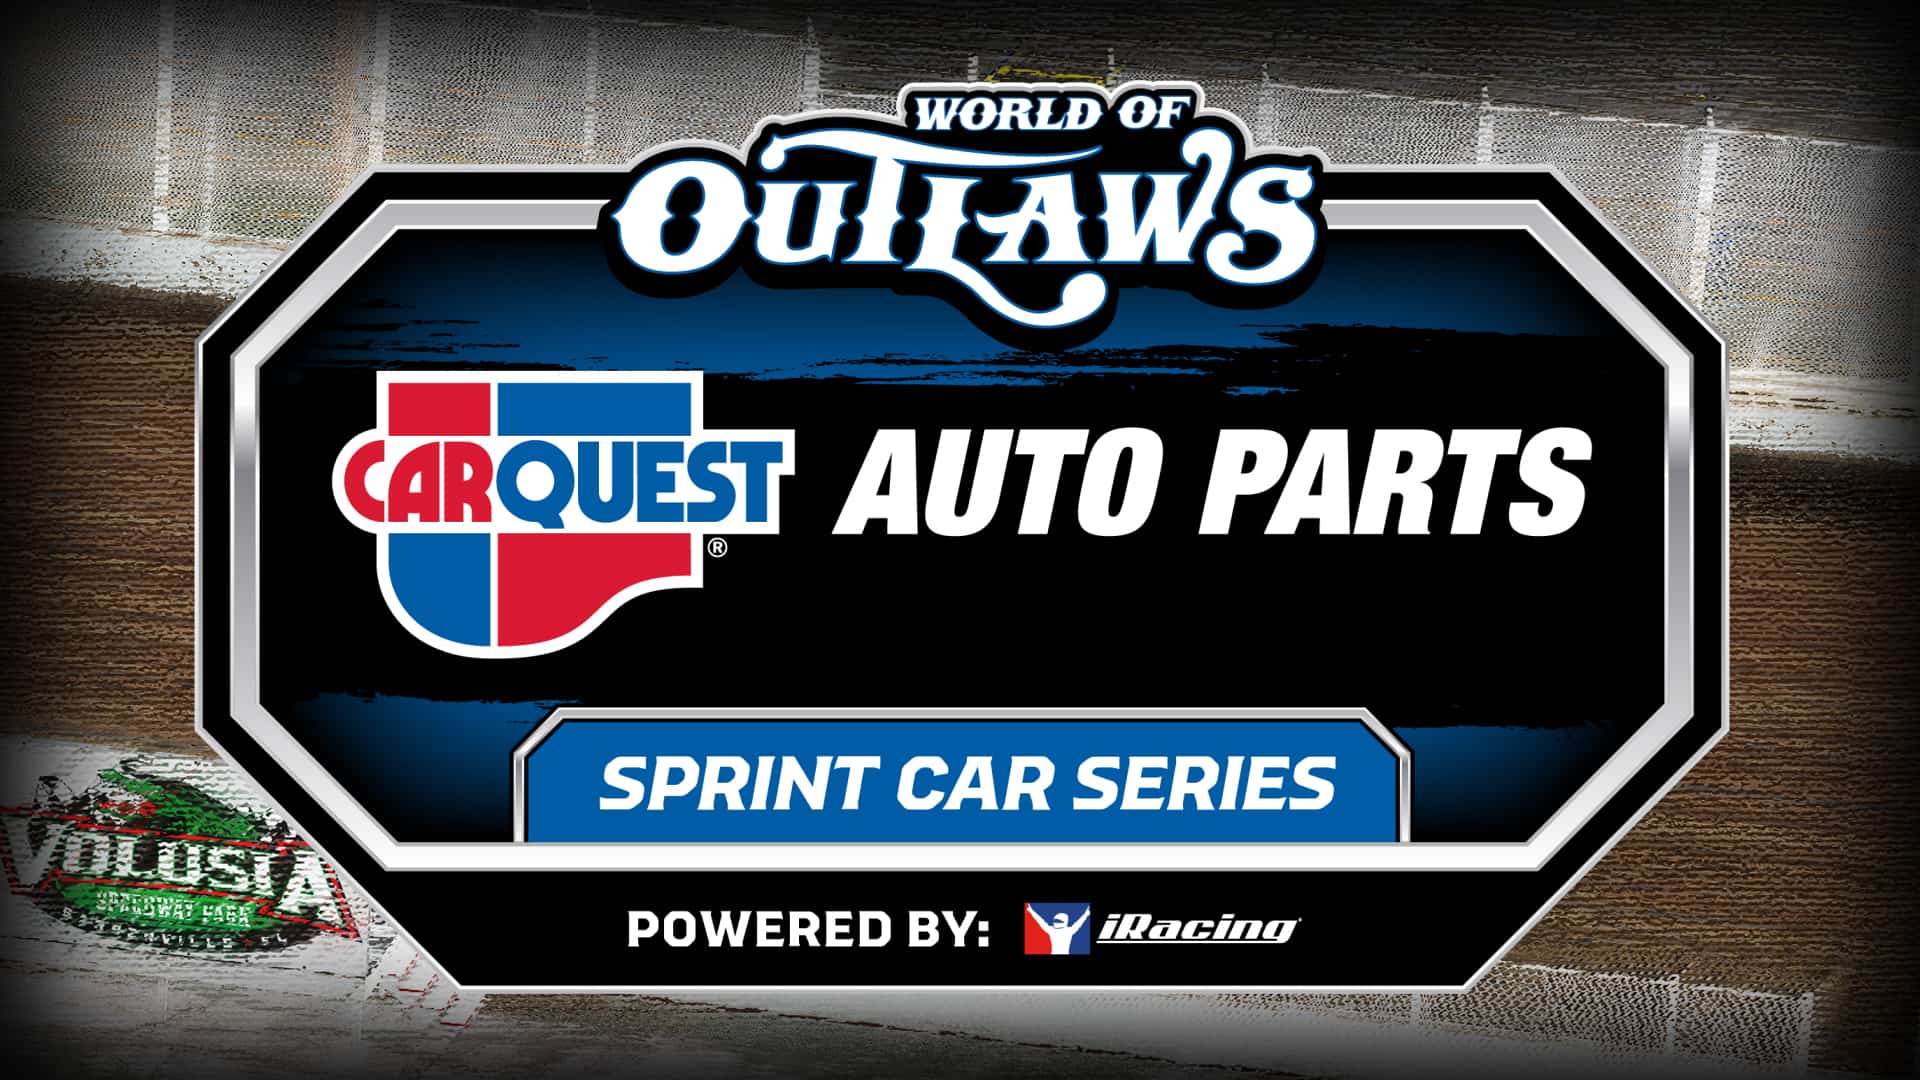 2022-23 iRacing World of Outlaws Carquest Auto Parts Sprint Car Series begins tonight